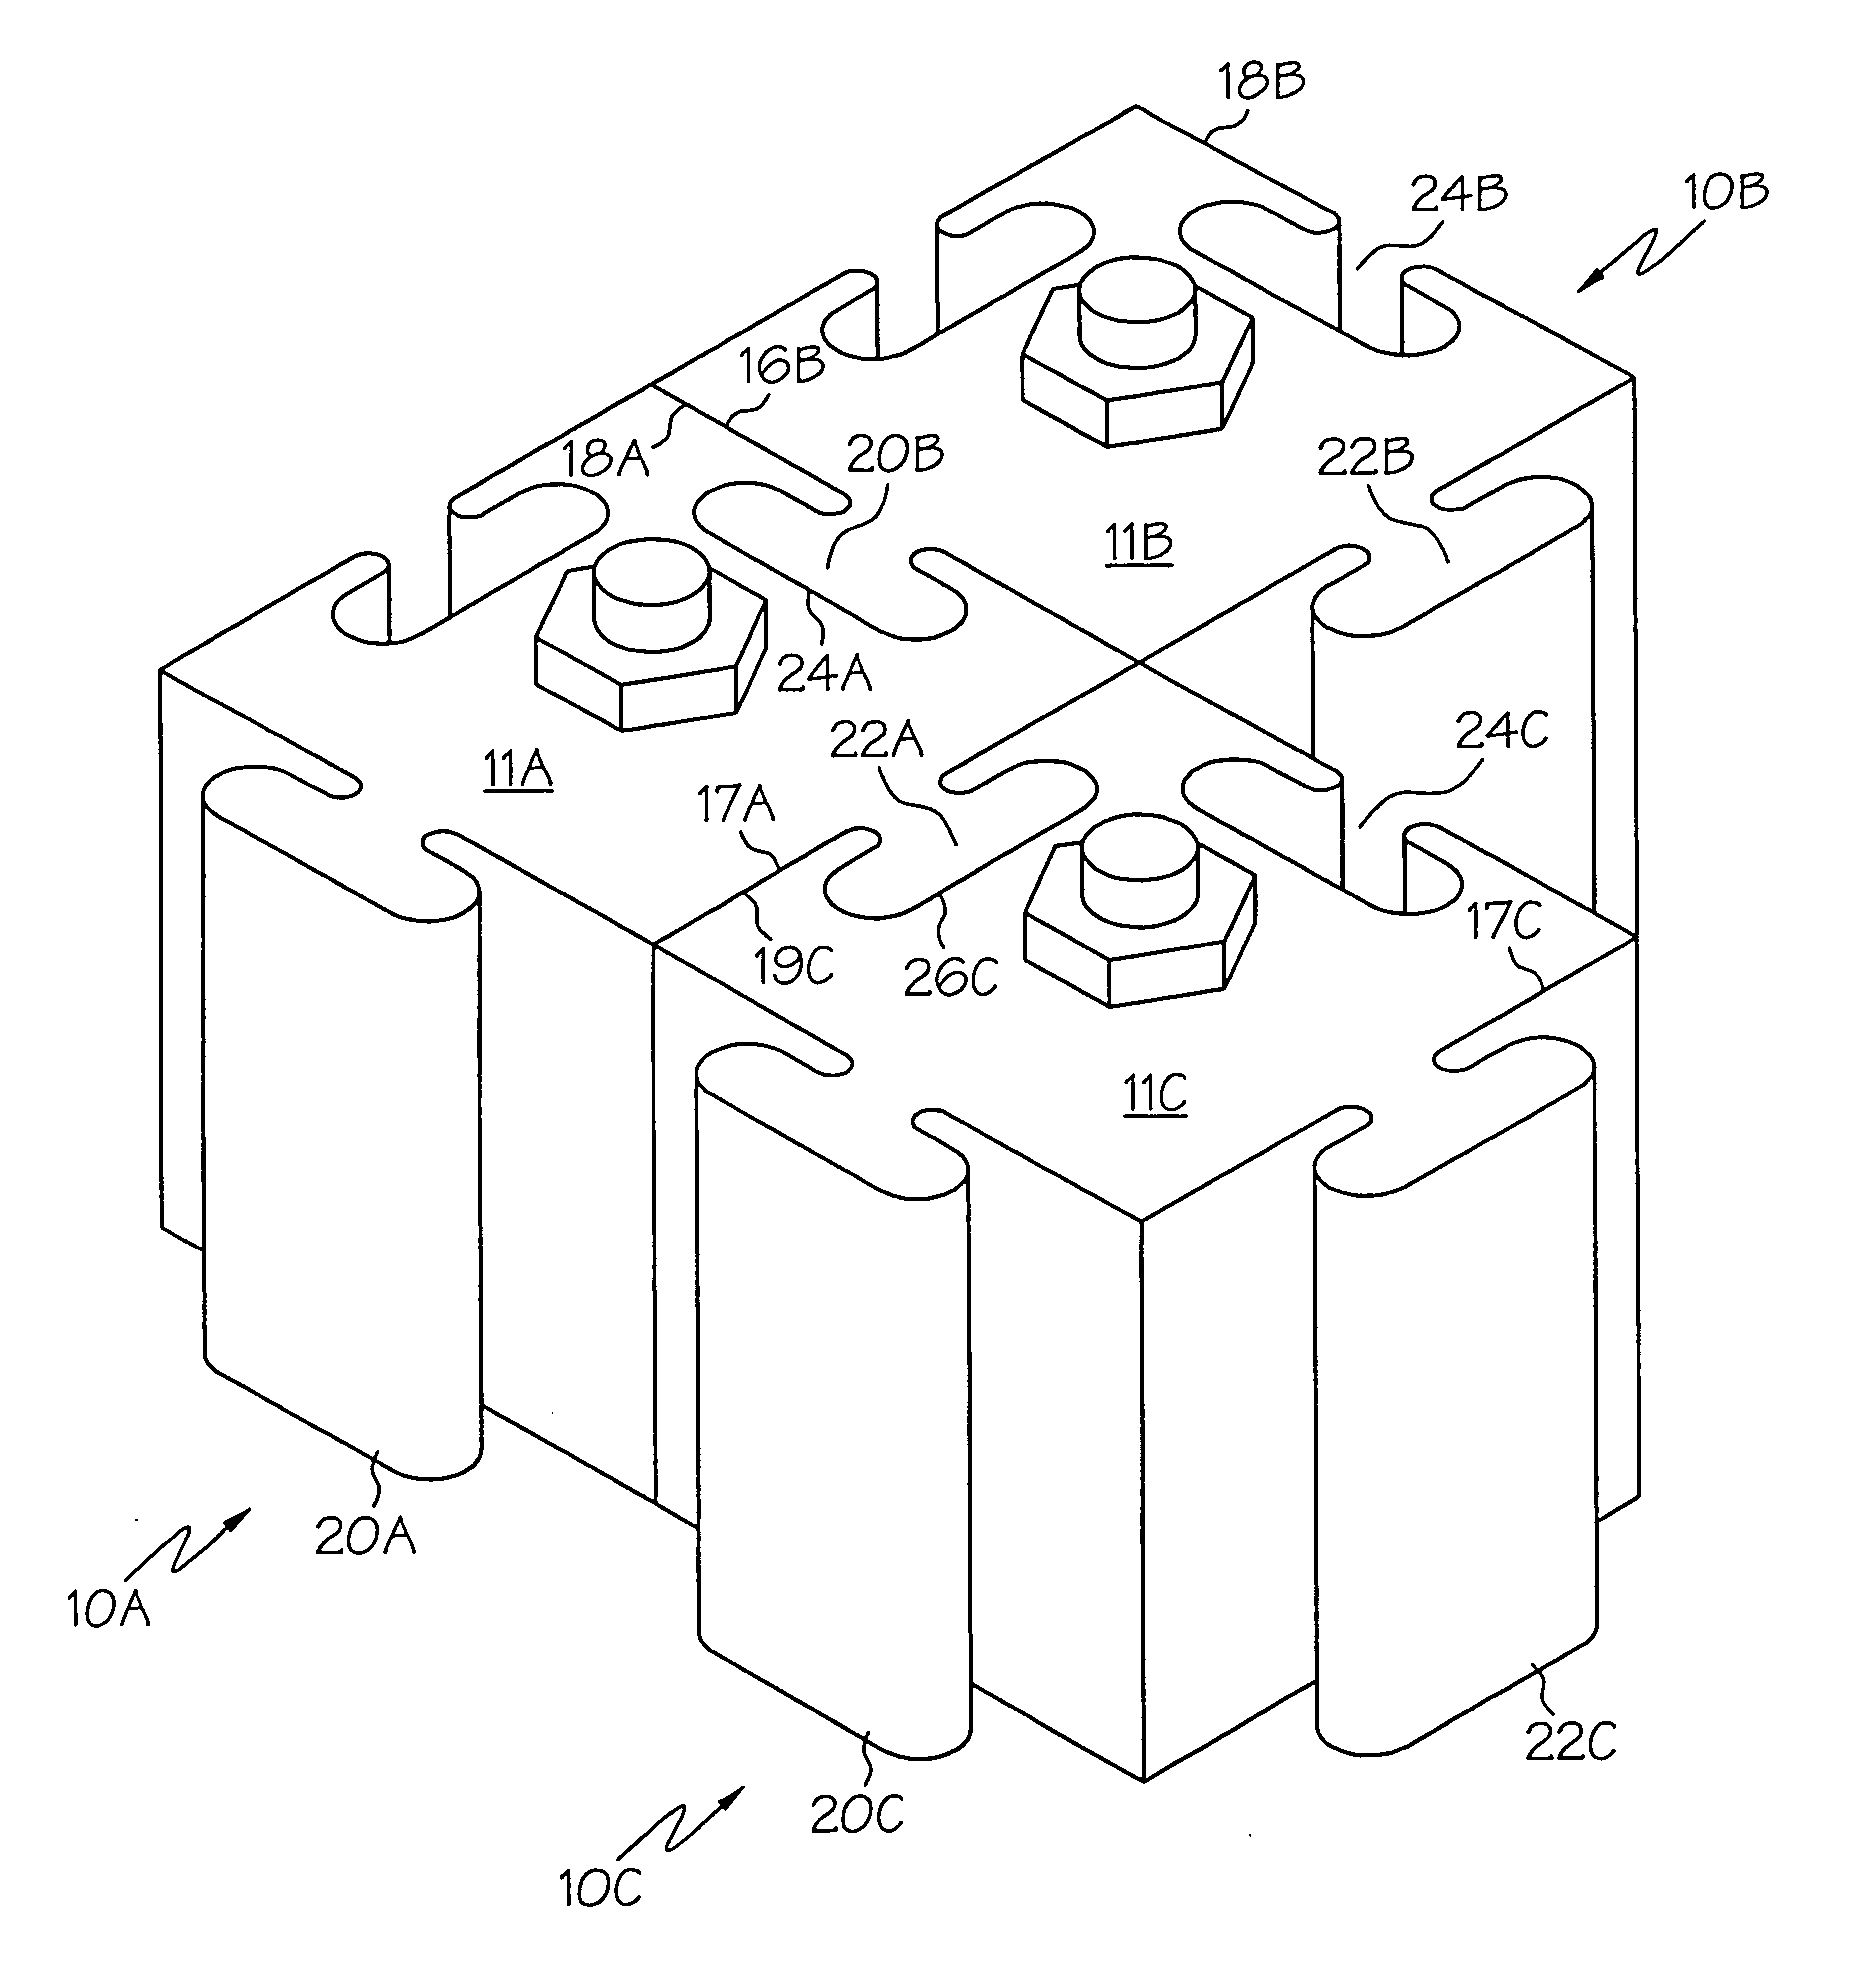 Interlocking and stackable container